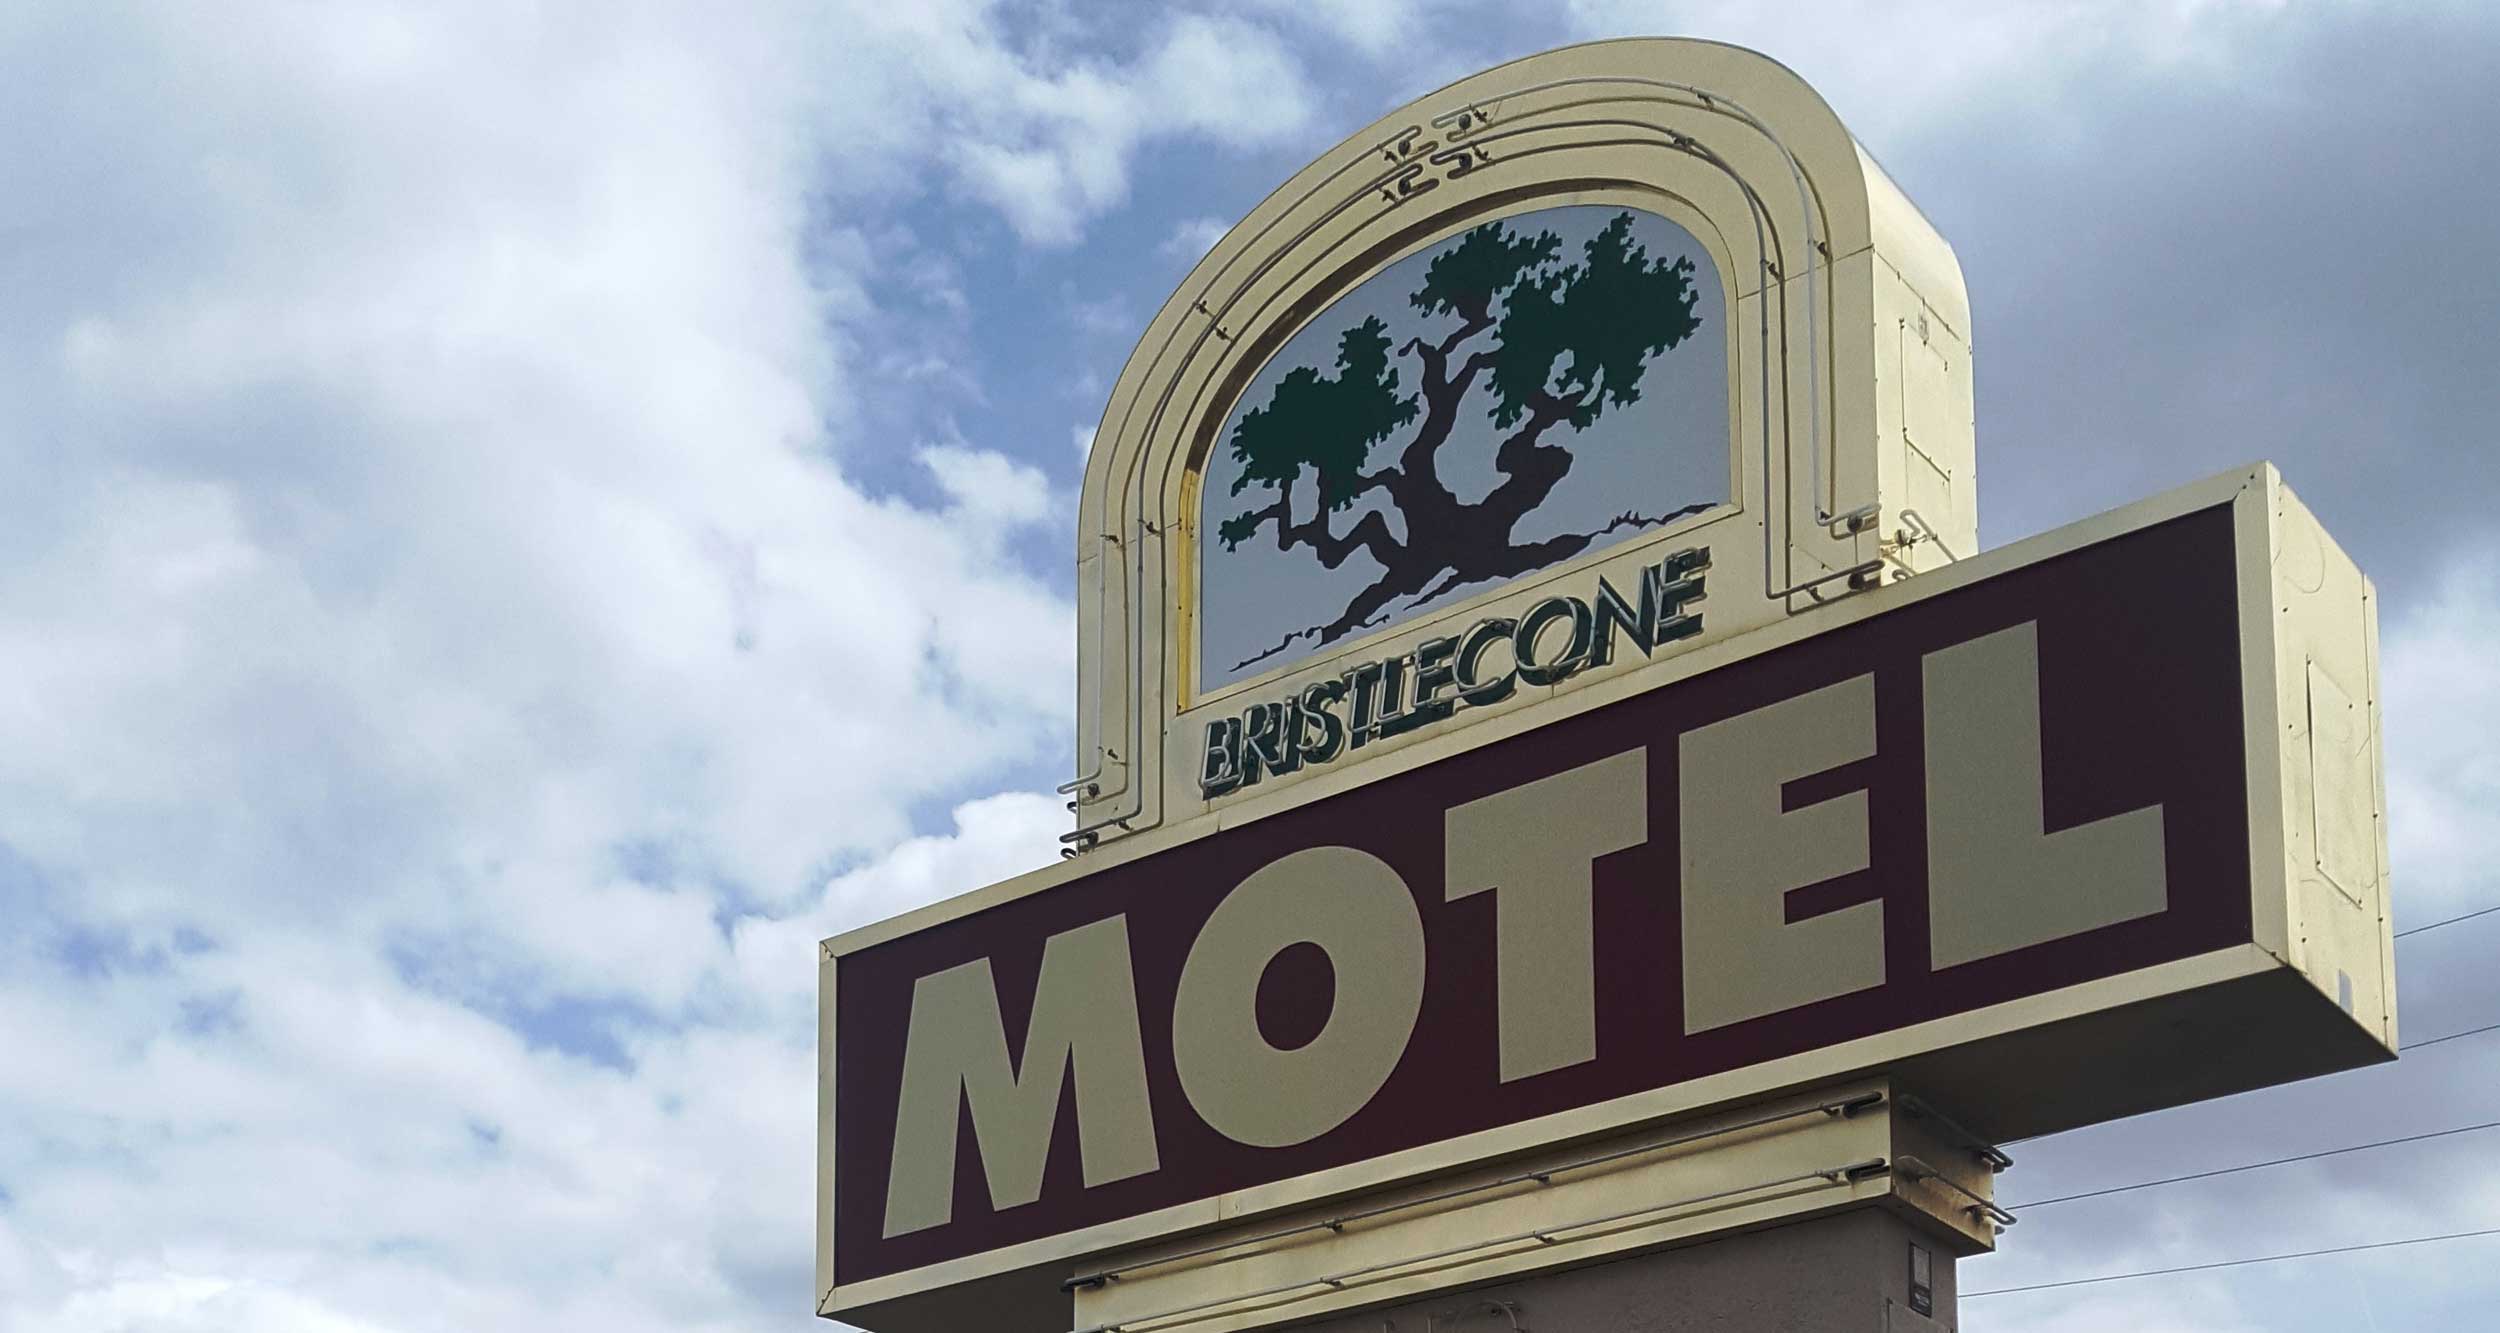 Homepage DONT TOUCH NEW – Bristlecone Motel, Ely Nevada